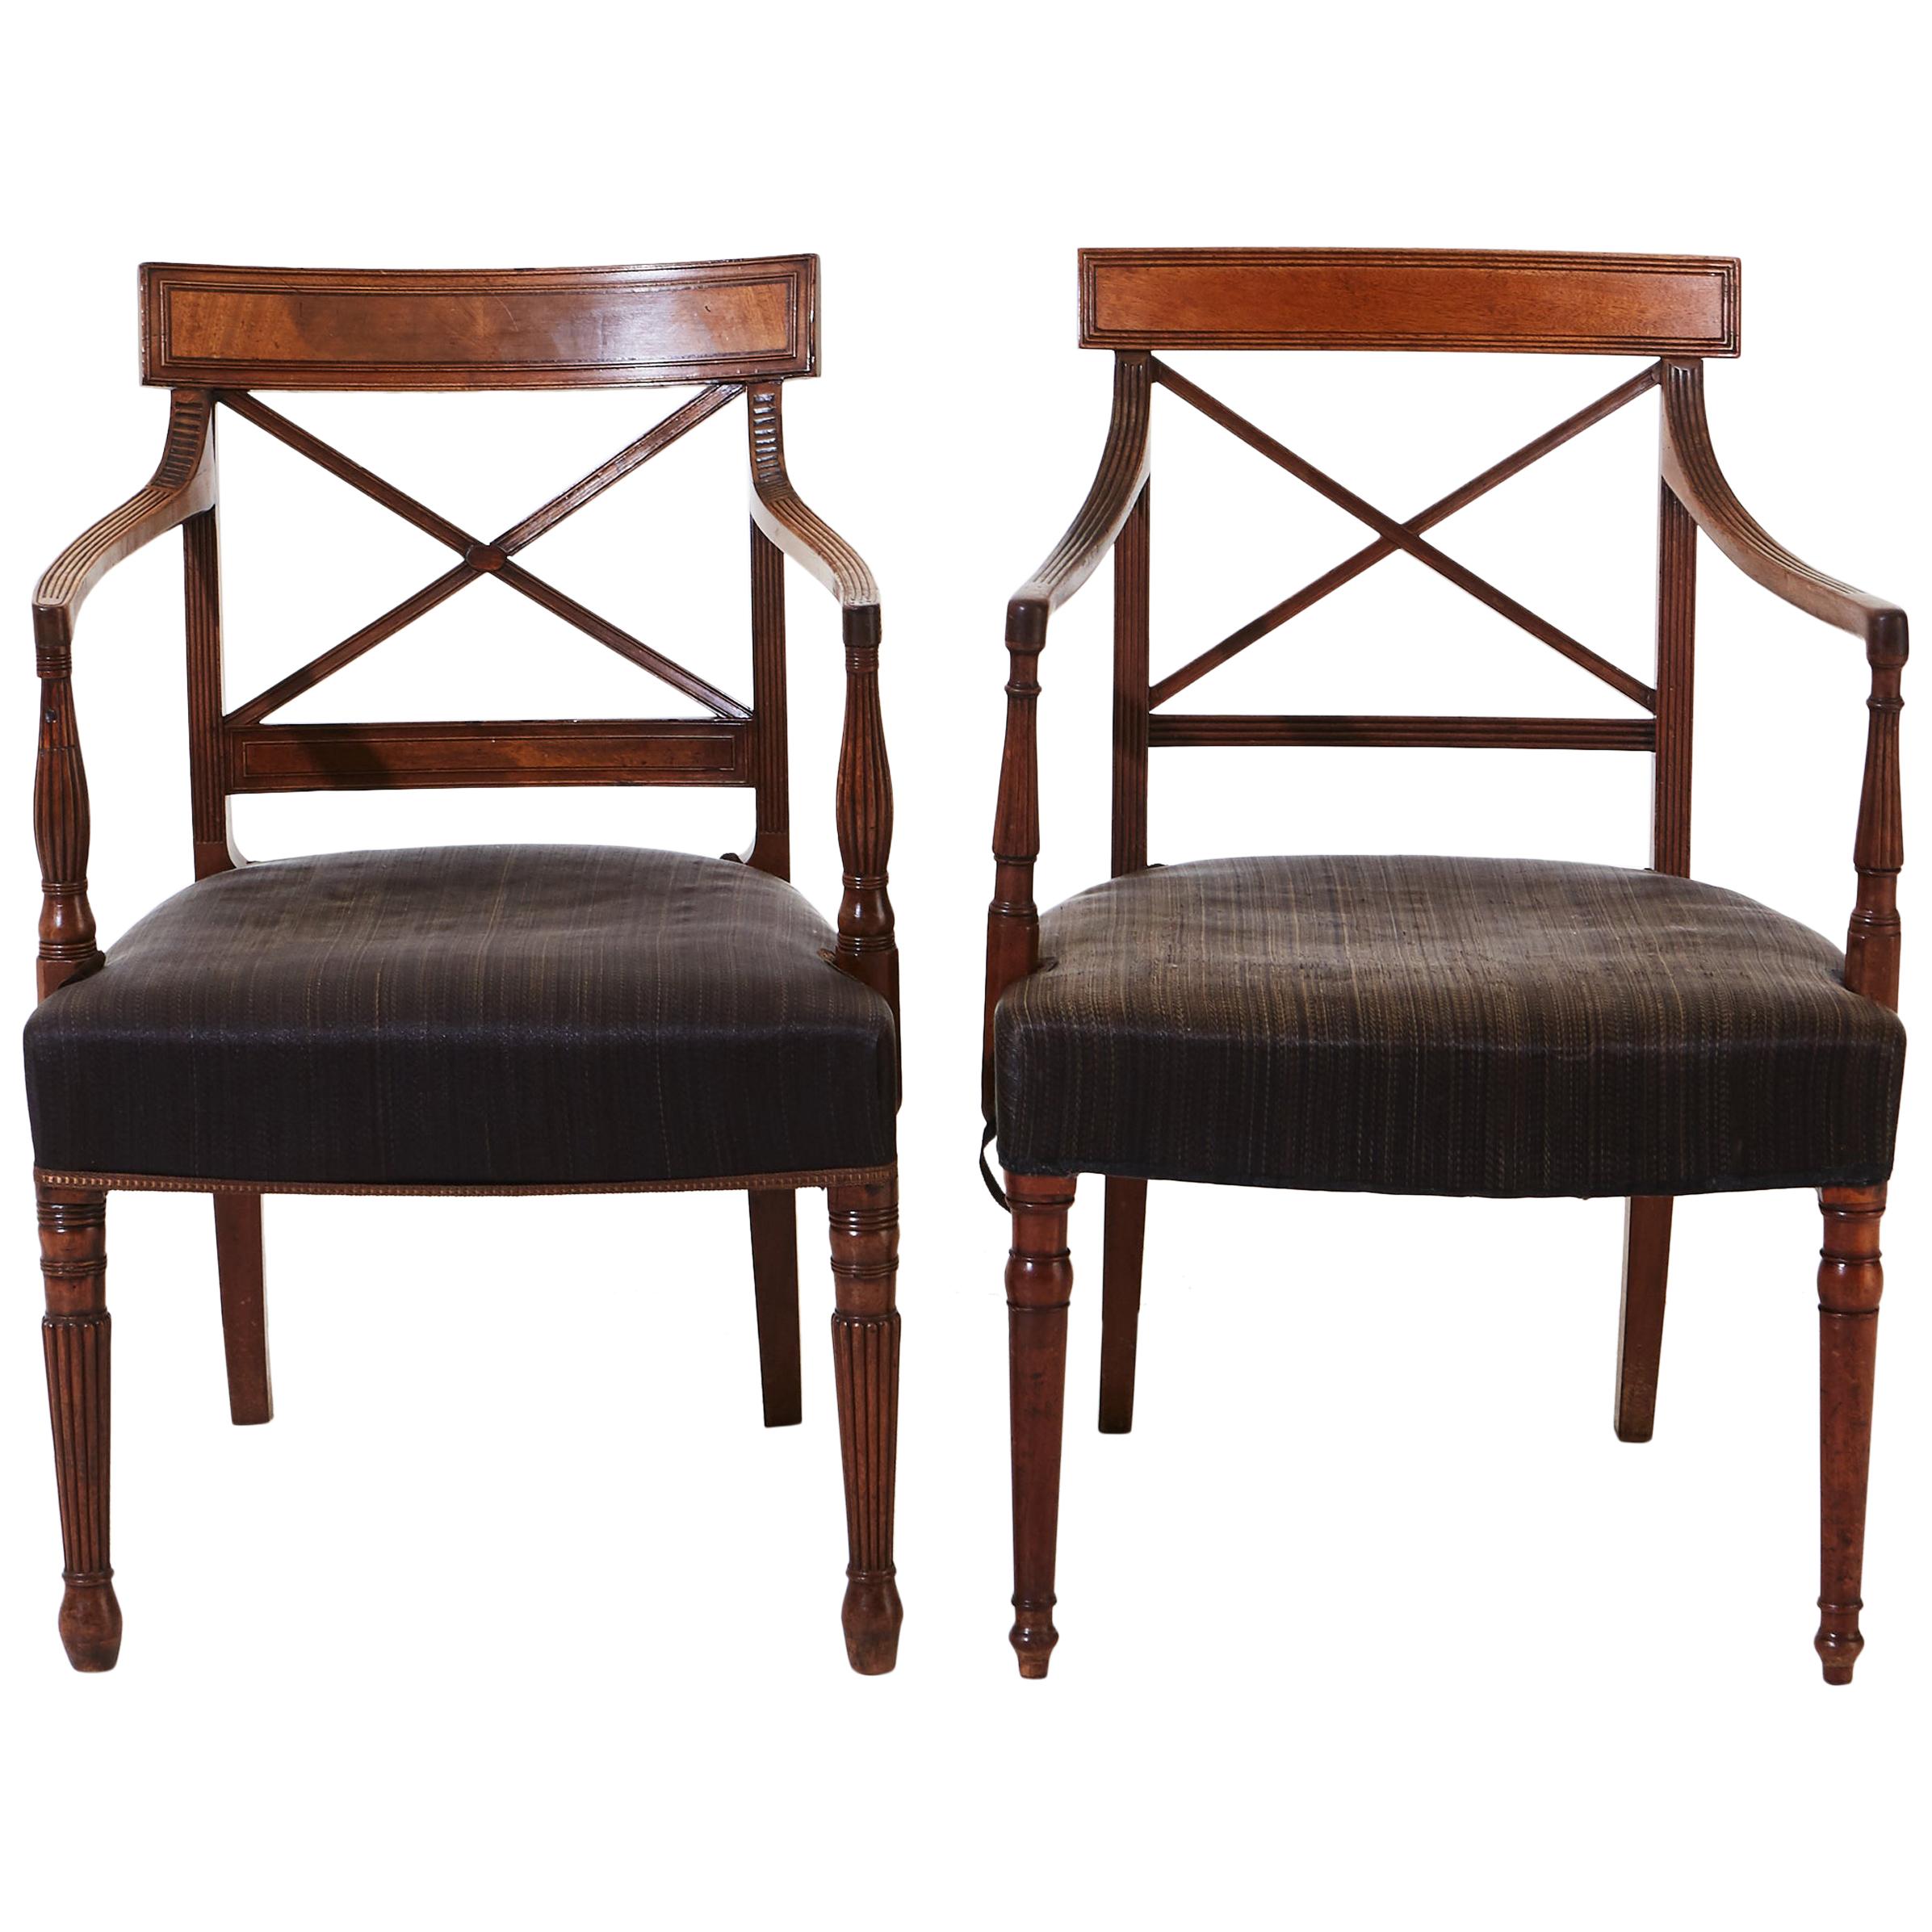 Pair of Regency Mahogany Arm Chairs, with Original Horsehair Upholstery